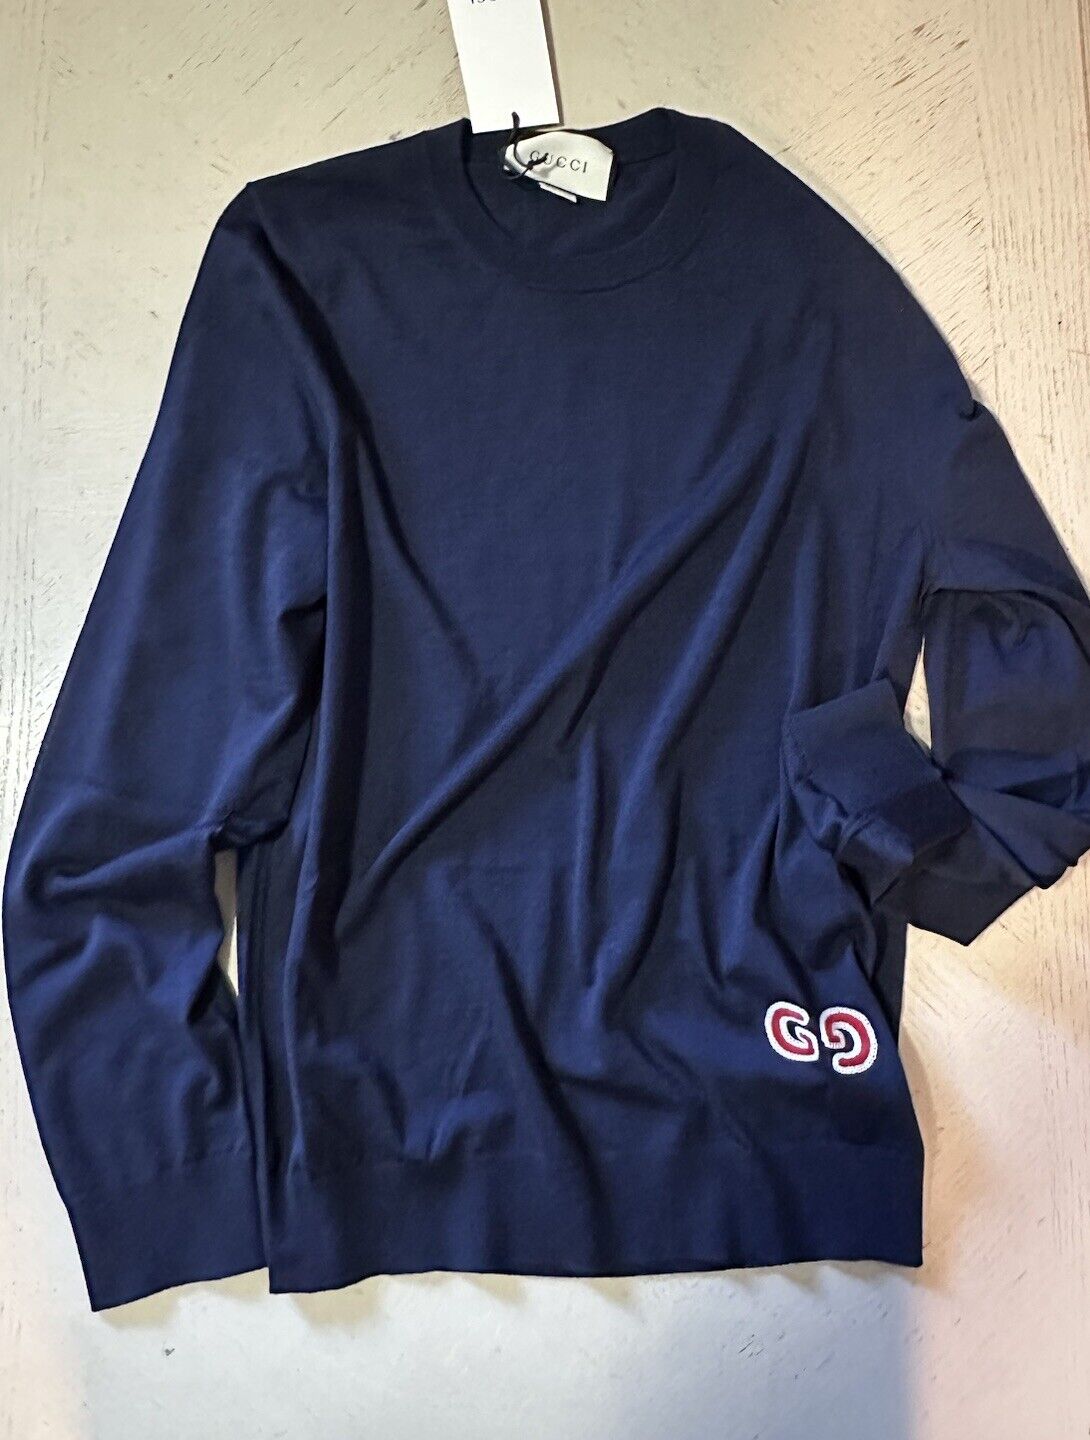 NWT $1250 Gucci Men Wool Knit Crewneck Sweater Navy Size S Italy 576810